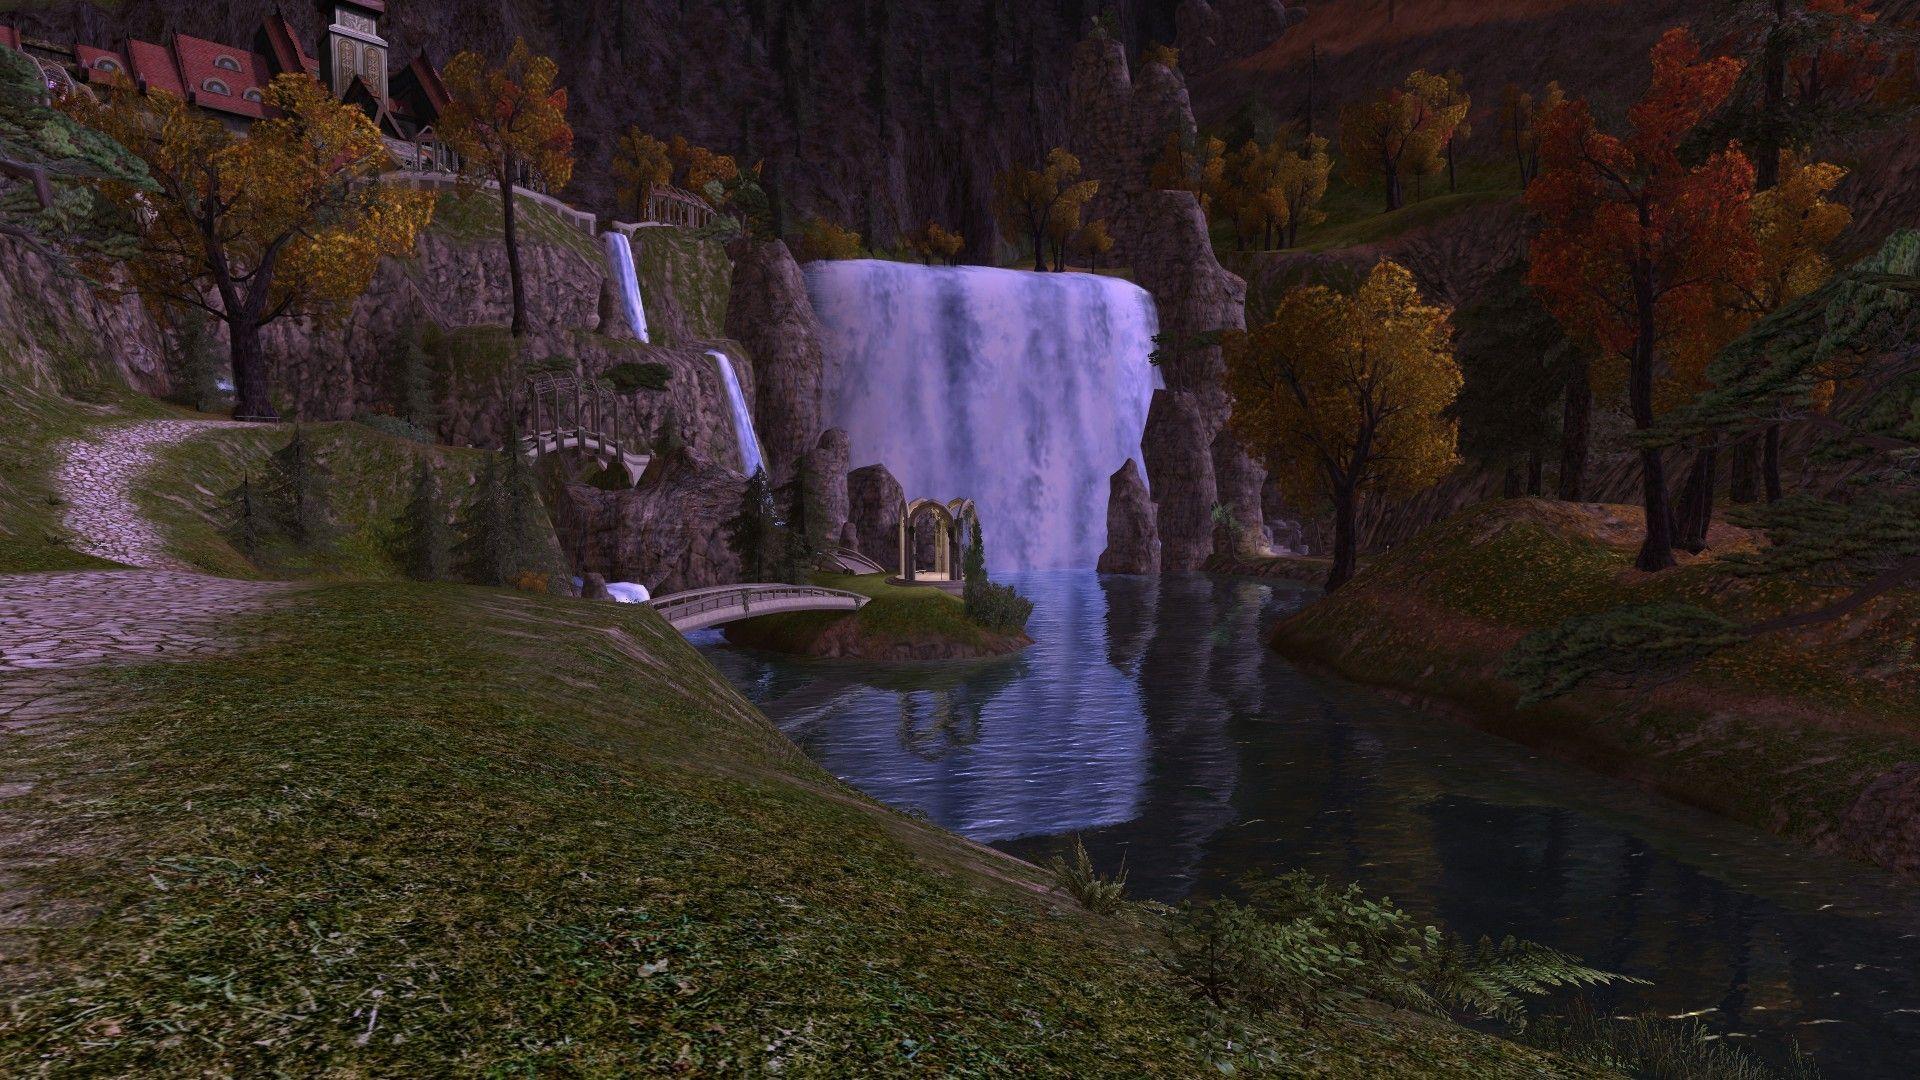 Rivendell Wallpapers Wallpaper Cave